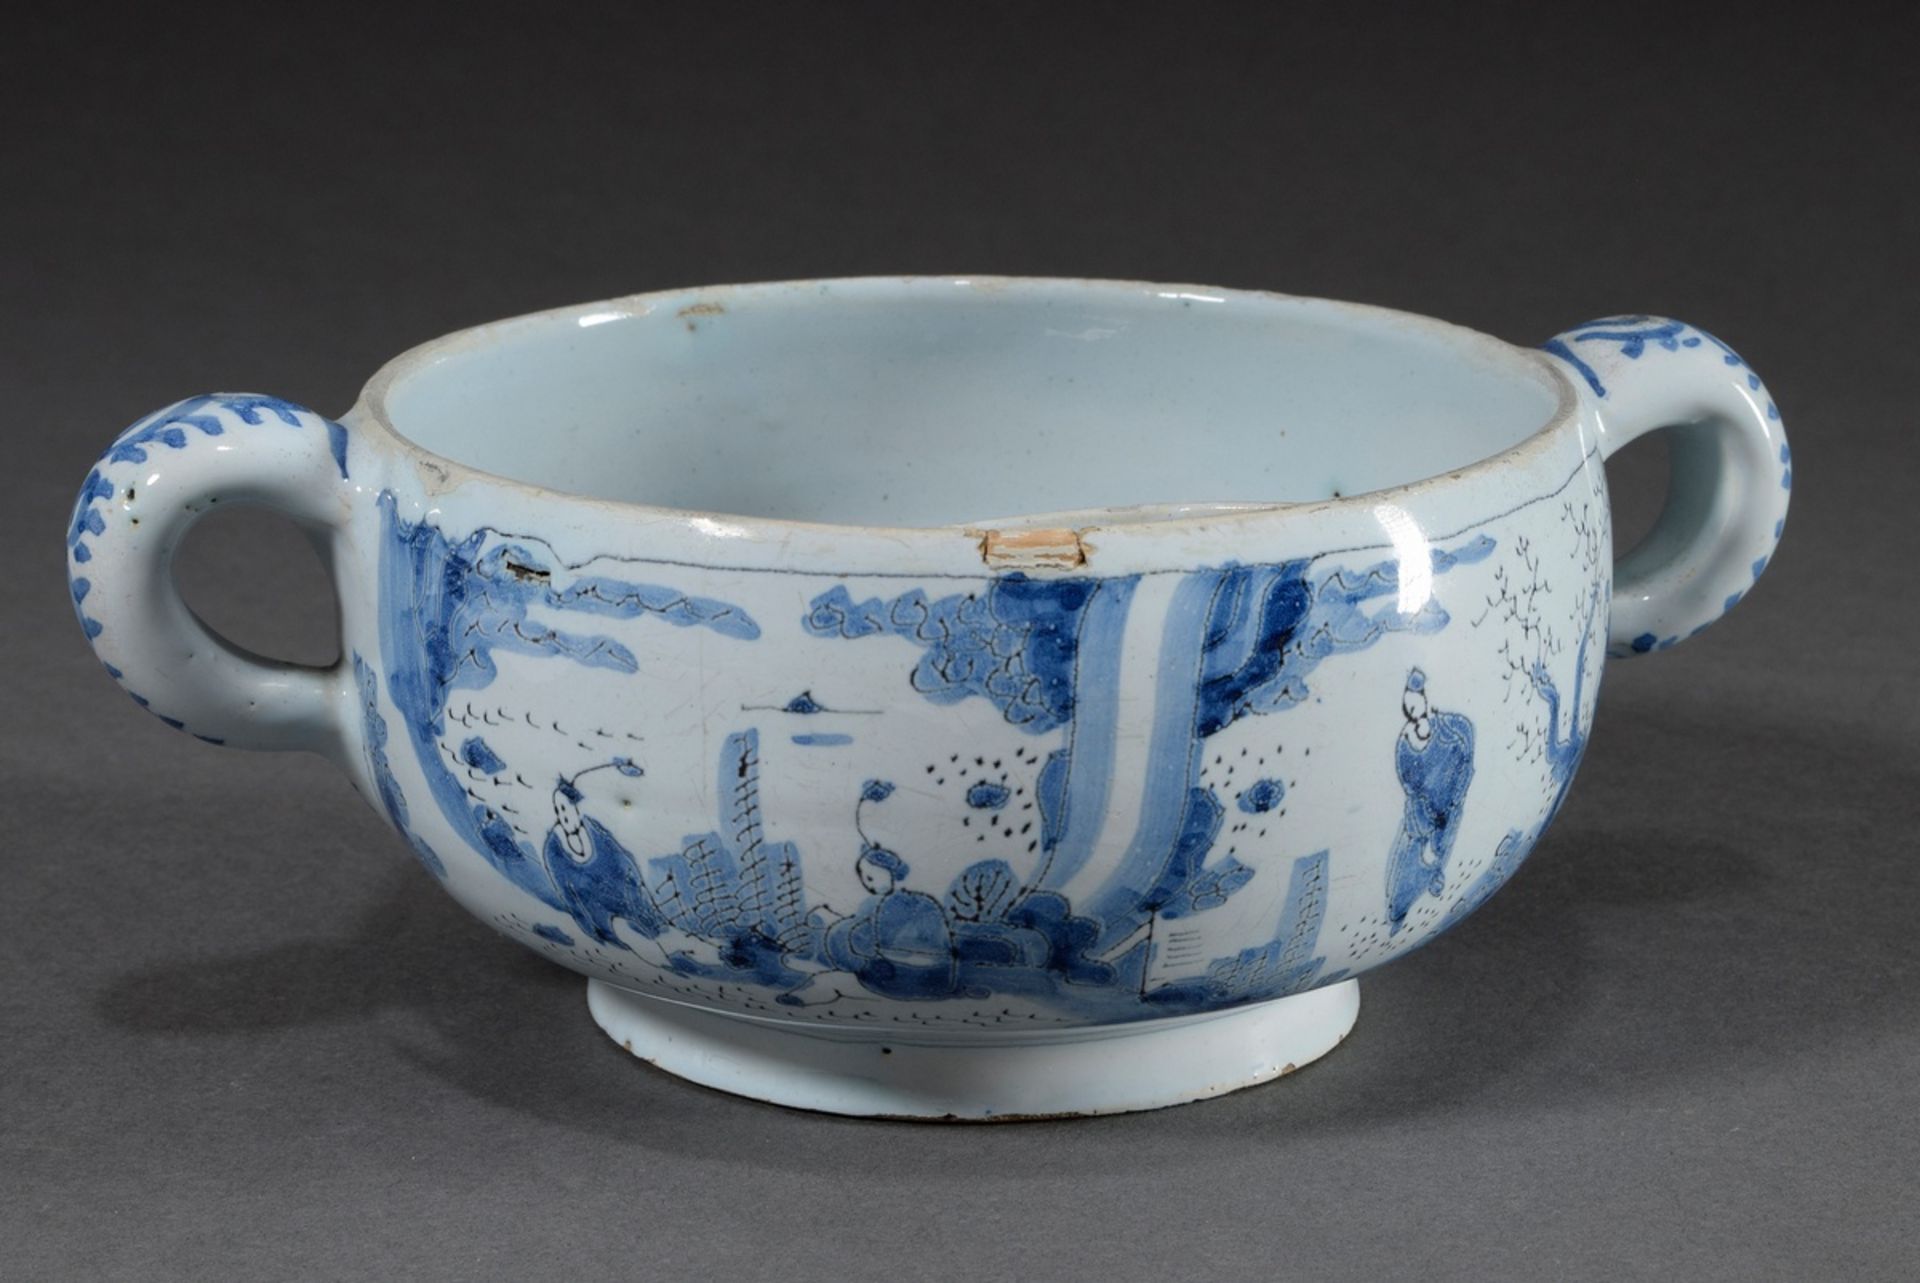 Faience shaving bowl with strainer insert for brush/soap and side handles, fine blue painting decor - Image 2 of 5